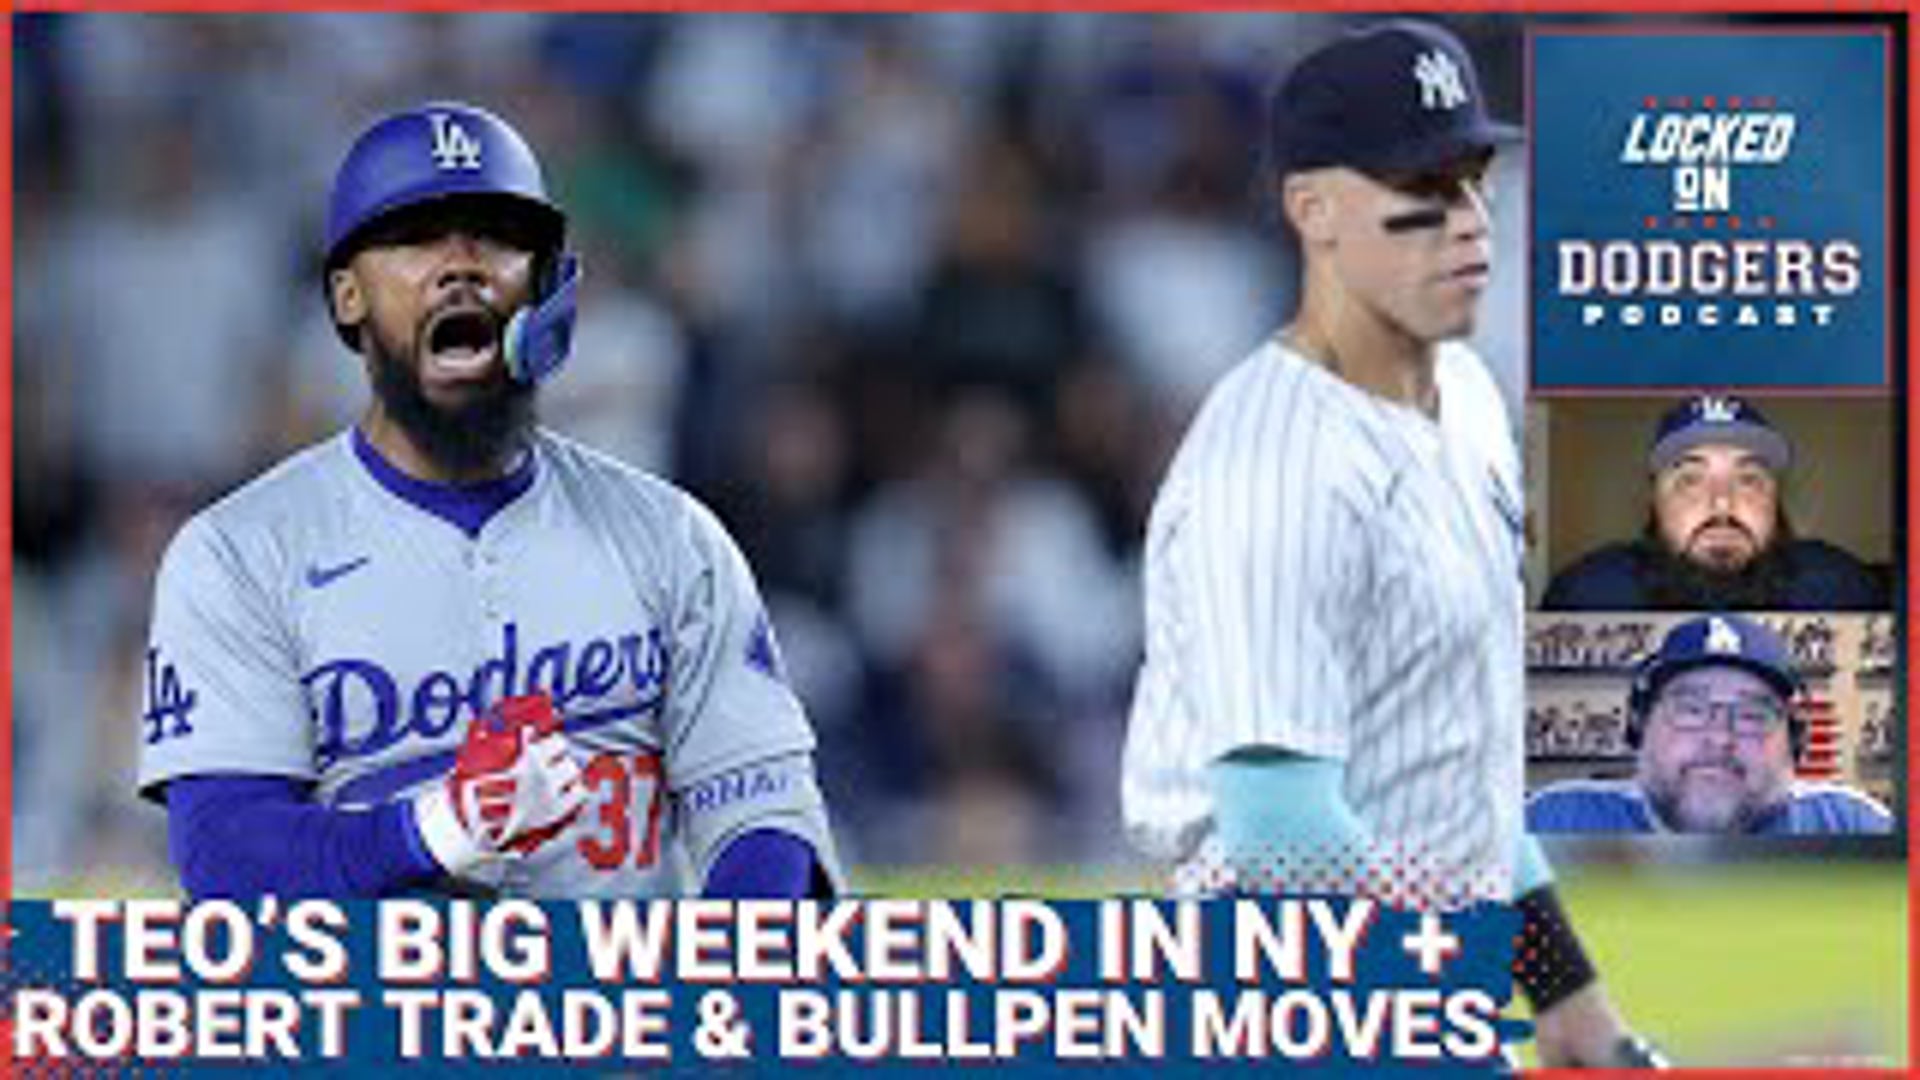 The Dodgers took the weekend series against the Yankees in New York, but failed to get the sweep on Sunday. It was a good series for the pitching.